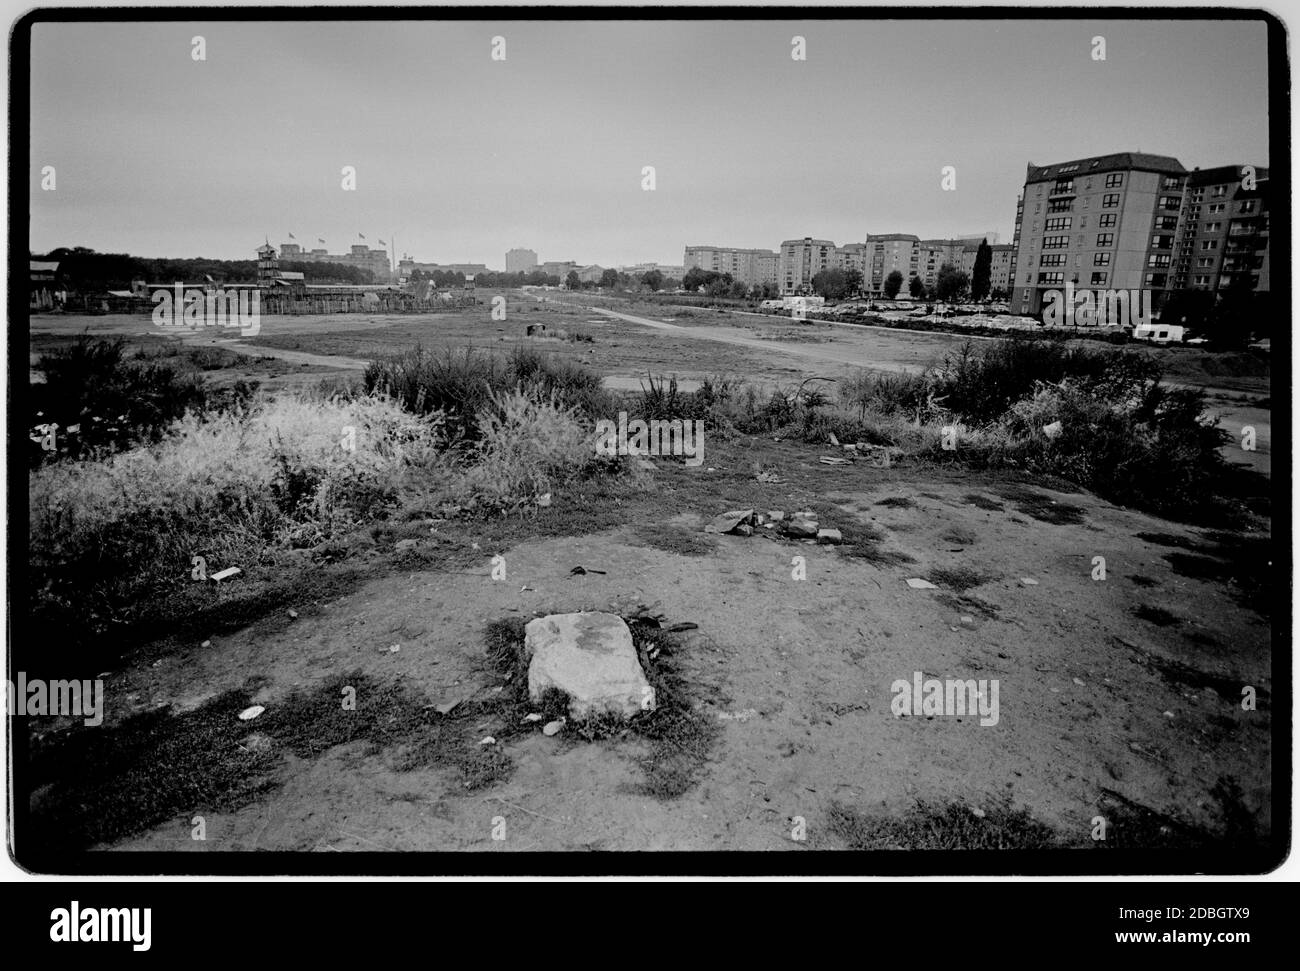 East Germany 1990 scanned in 2020 Potsdamer Platz, the former heavilly defended no mans land only 5 months earlier, in the centre of Berlin showing on the right in what was EAST Berlin apartments for high ranking east German officials. The white stone in the foreground marks the spot where Hitlers bunker is. East Germany, Deutsche Demokratische Republik the DDR after the fall of the Wall but before reunification March 1990 and scanned in 2020.East Germany, officially the German Democratic Republic, was a country that existed from 1949 to 1990, the period when the eastern portion of Germany was Stock Photo